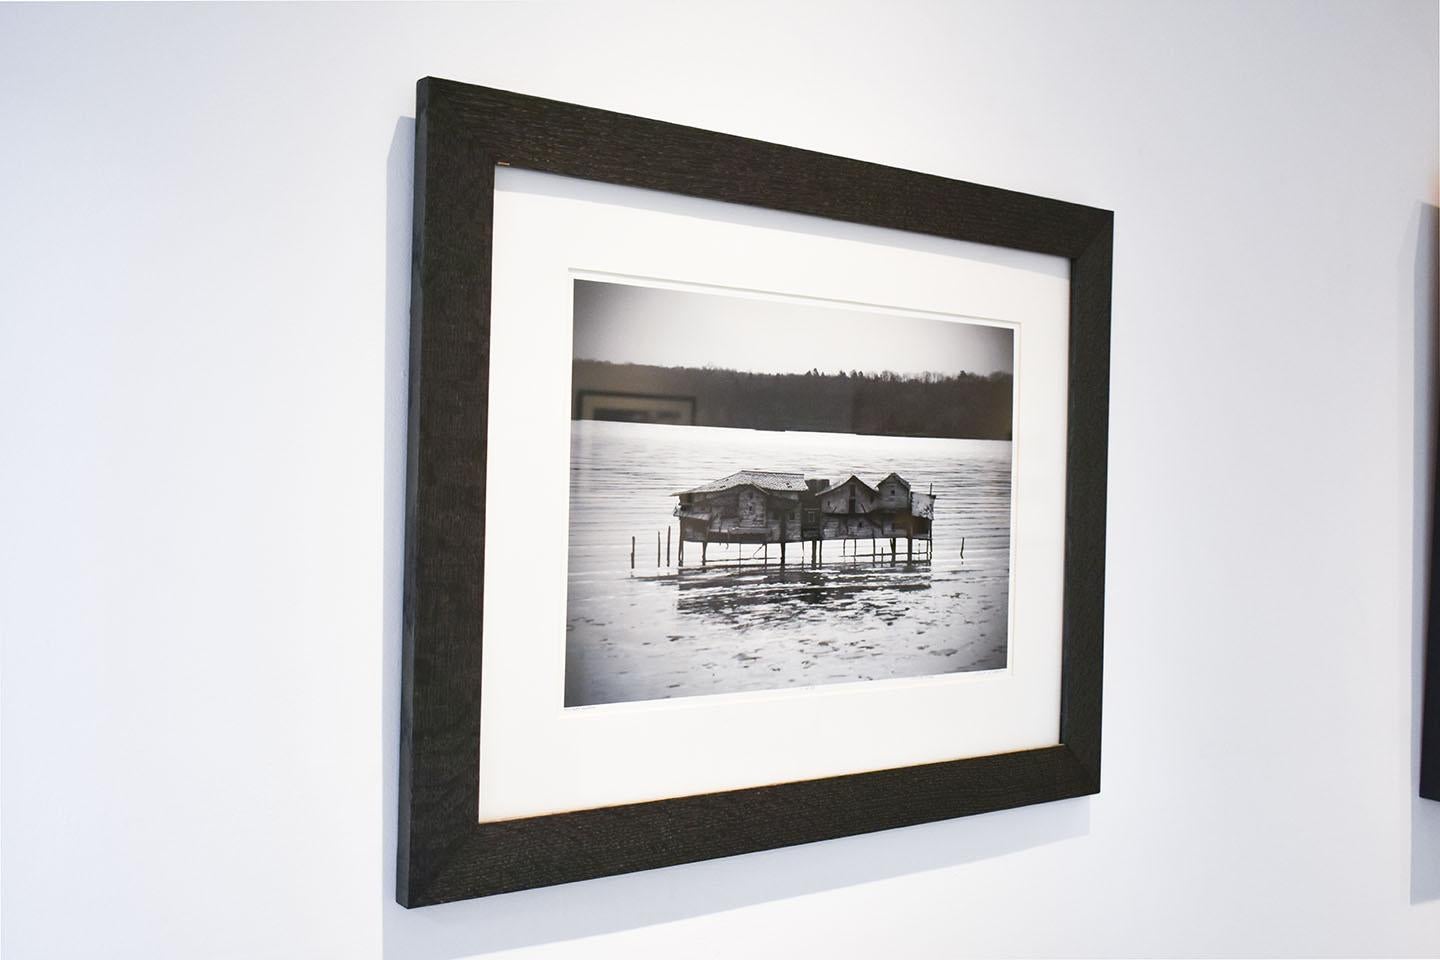 Mudflat House (Black & White Landscape Photograph of a House in Water) 2